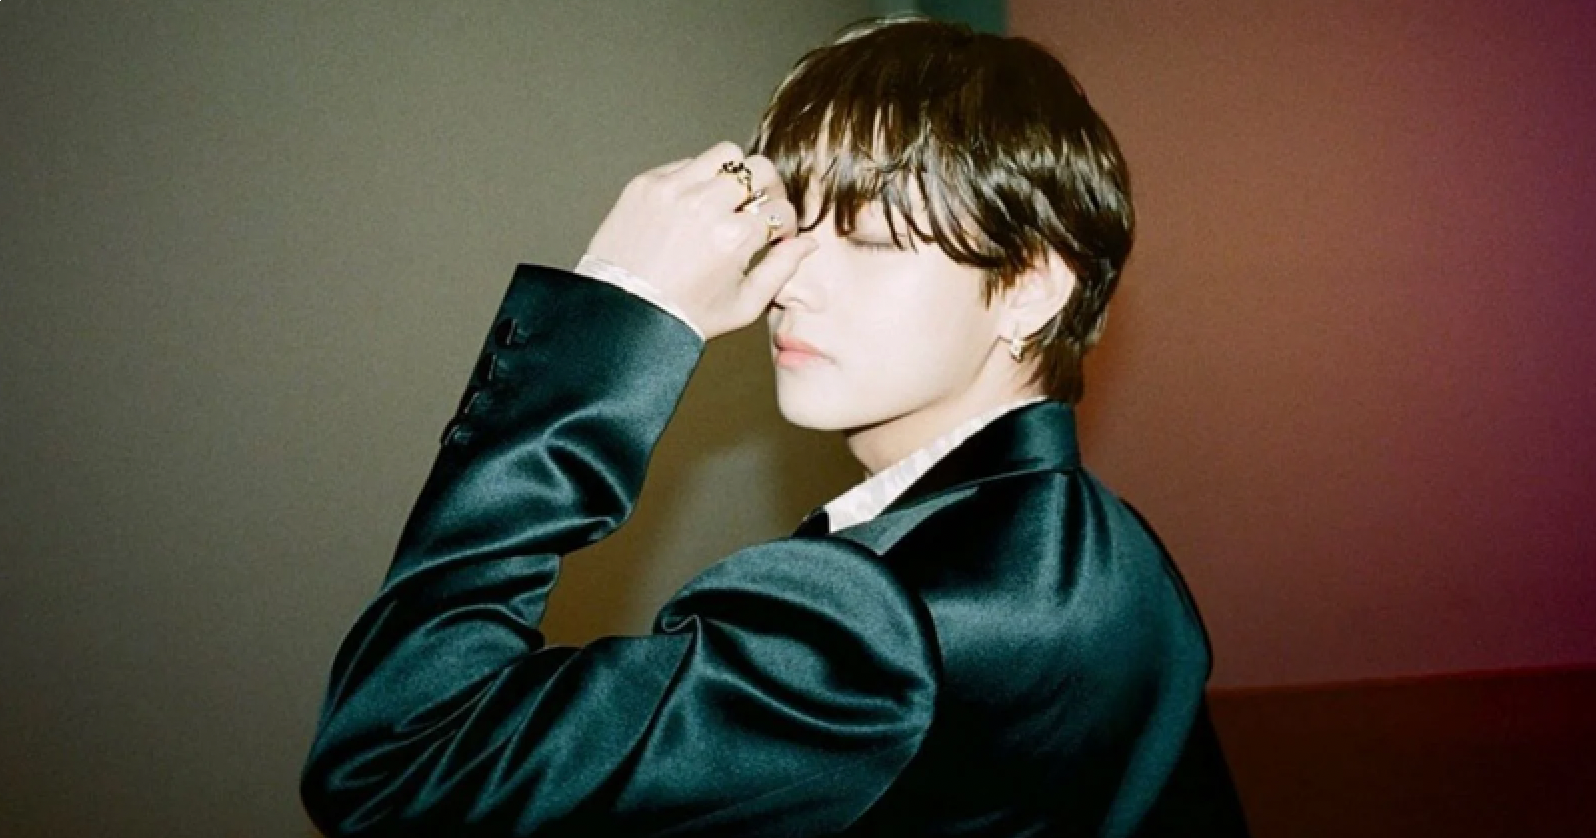 BTS V Becomes the Most-Followed Person on Instagram in the First 24 Hours